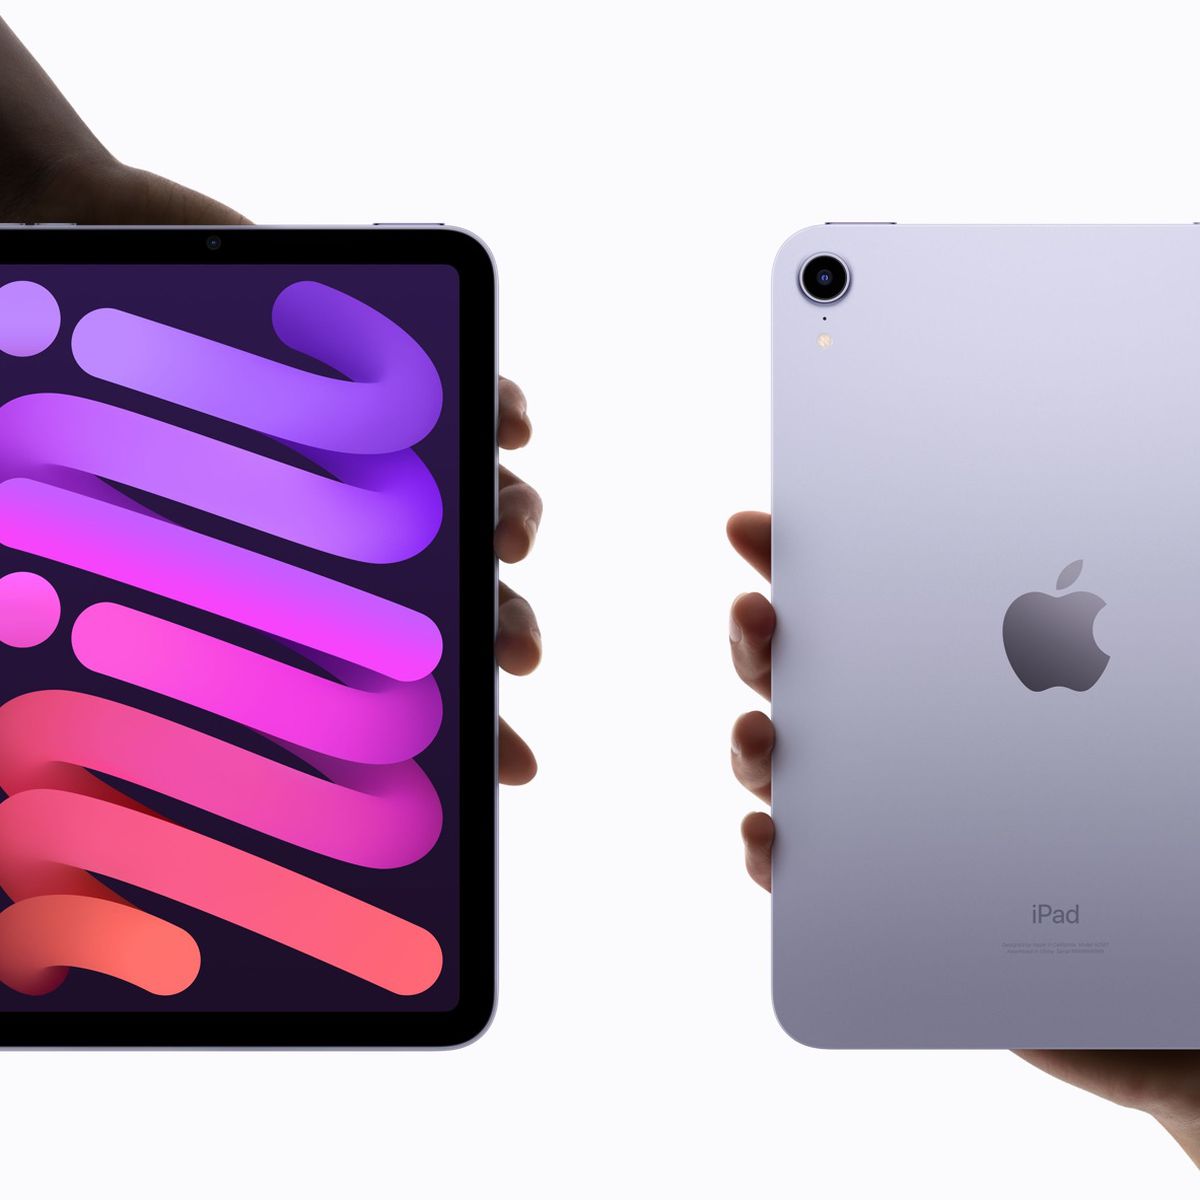 Apple’s new iPad mini is now discounted by up to $50